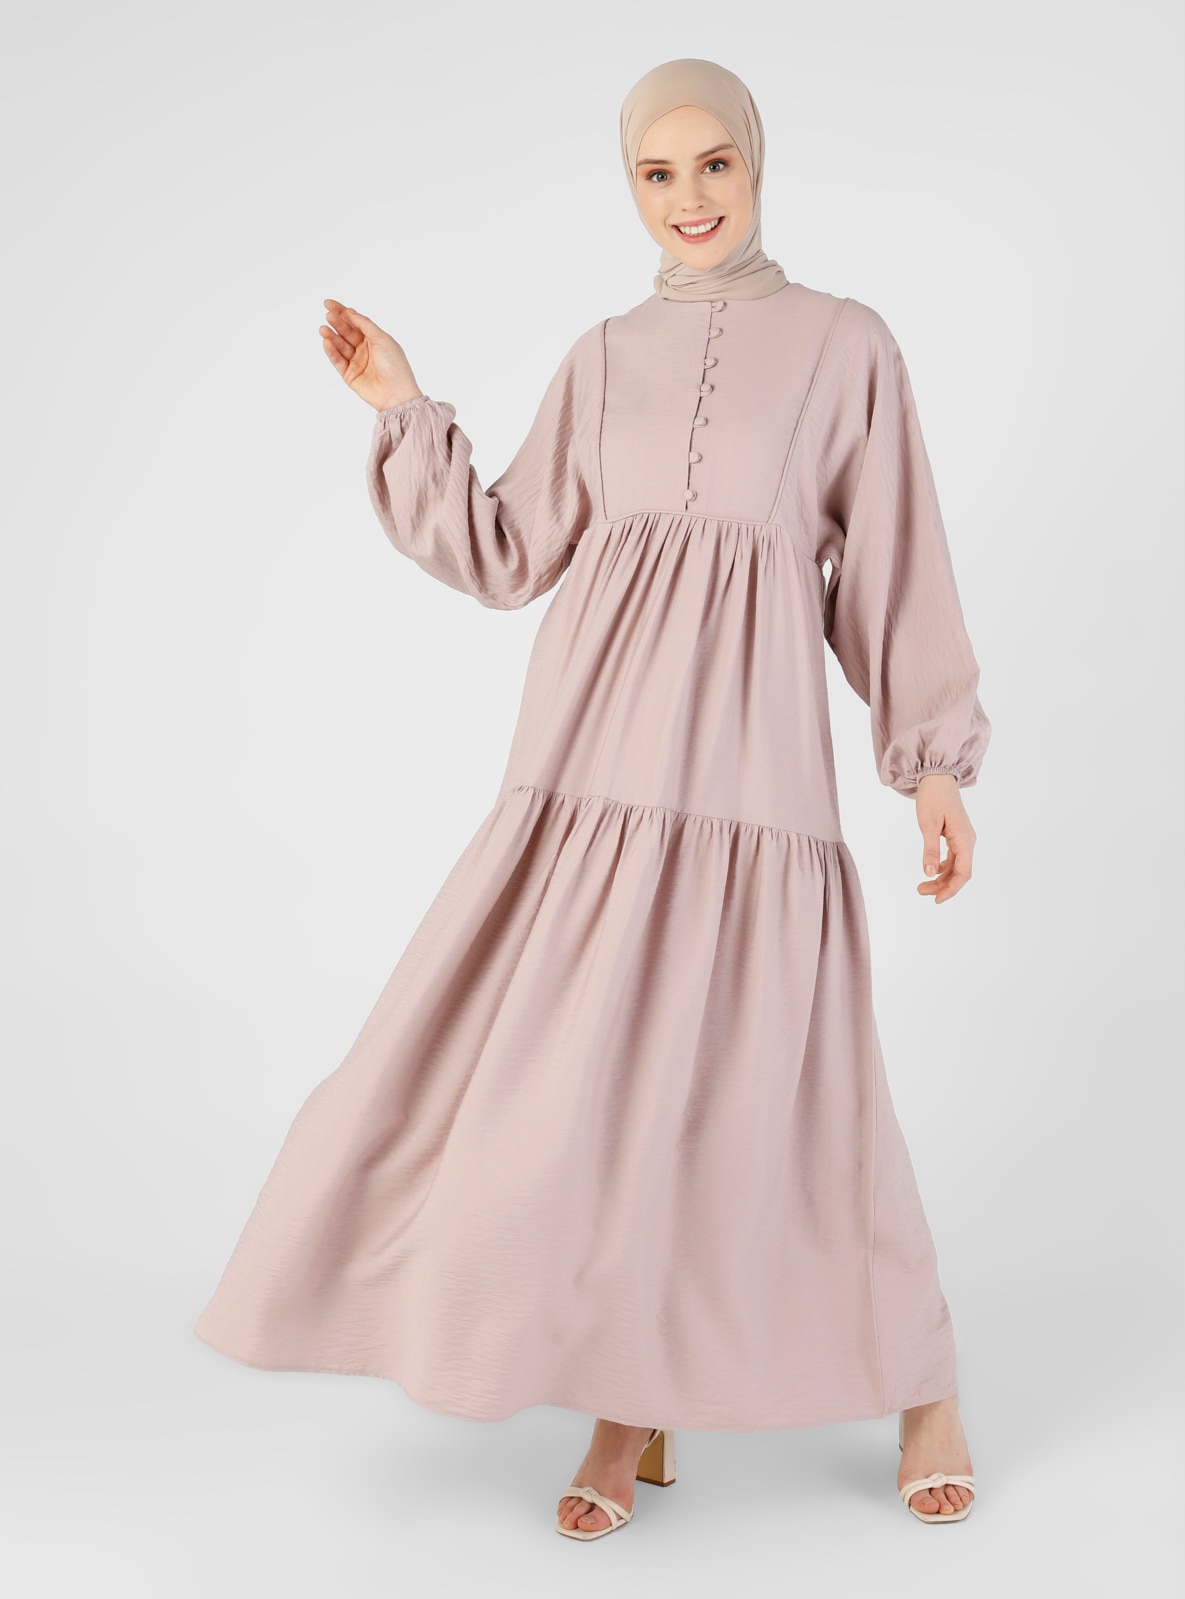 Pink - Crew neck - Unlined - Modest Dress - Casual